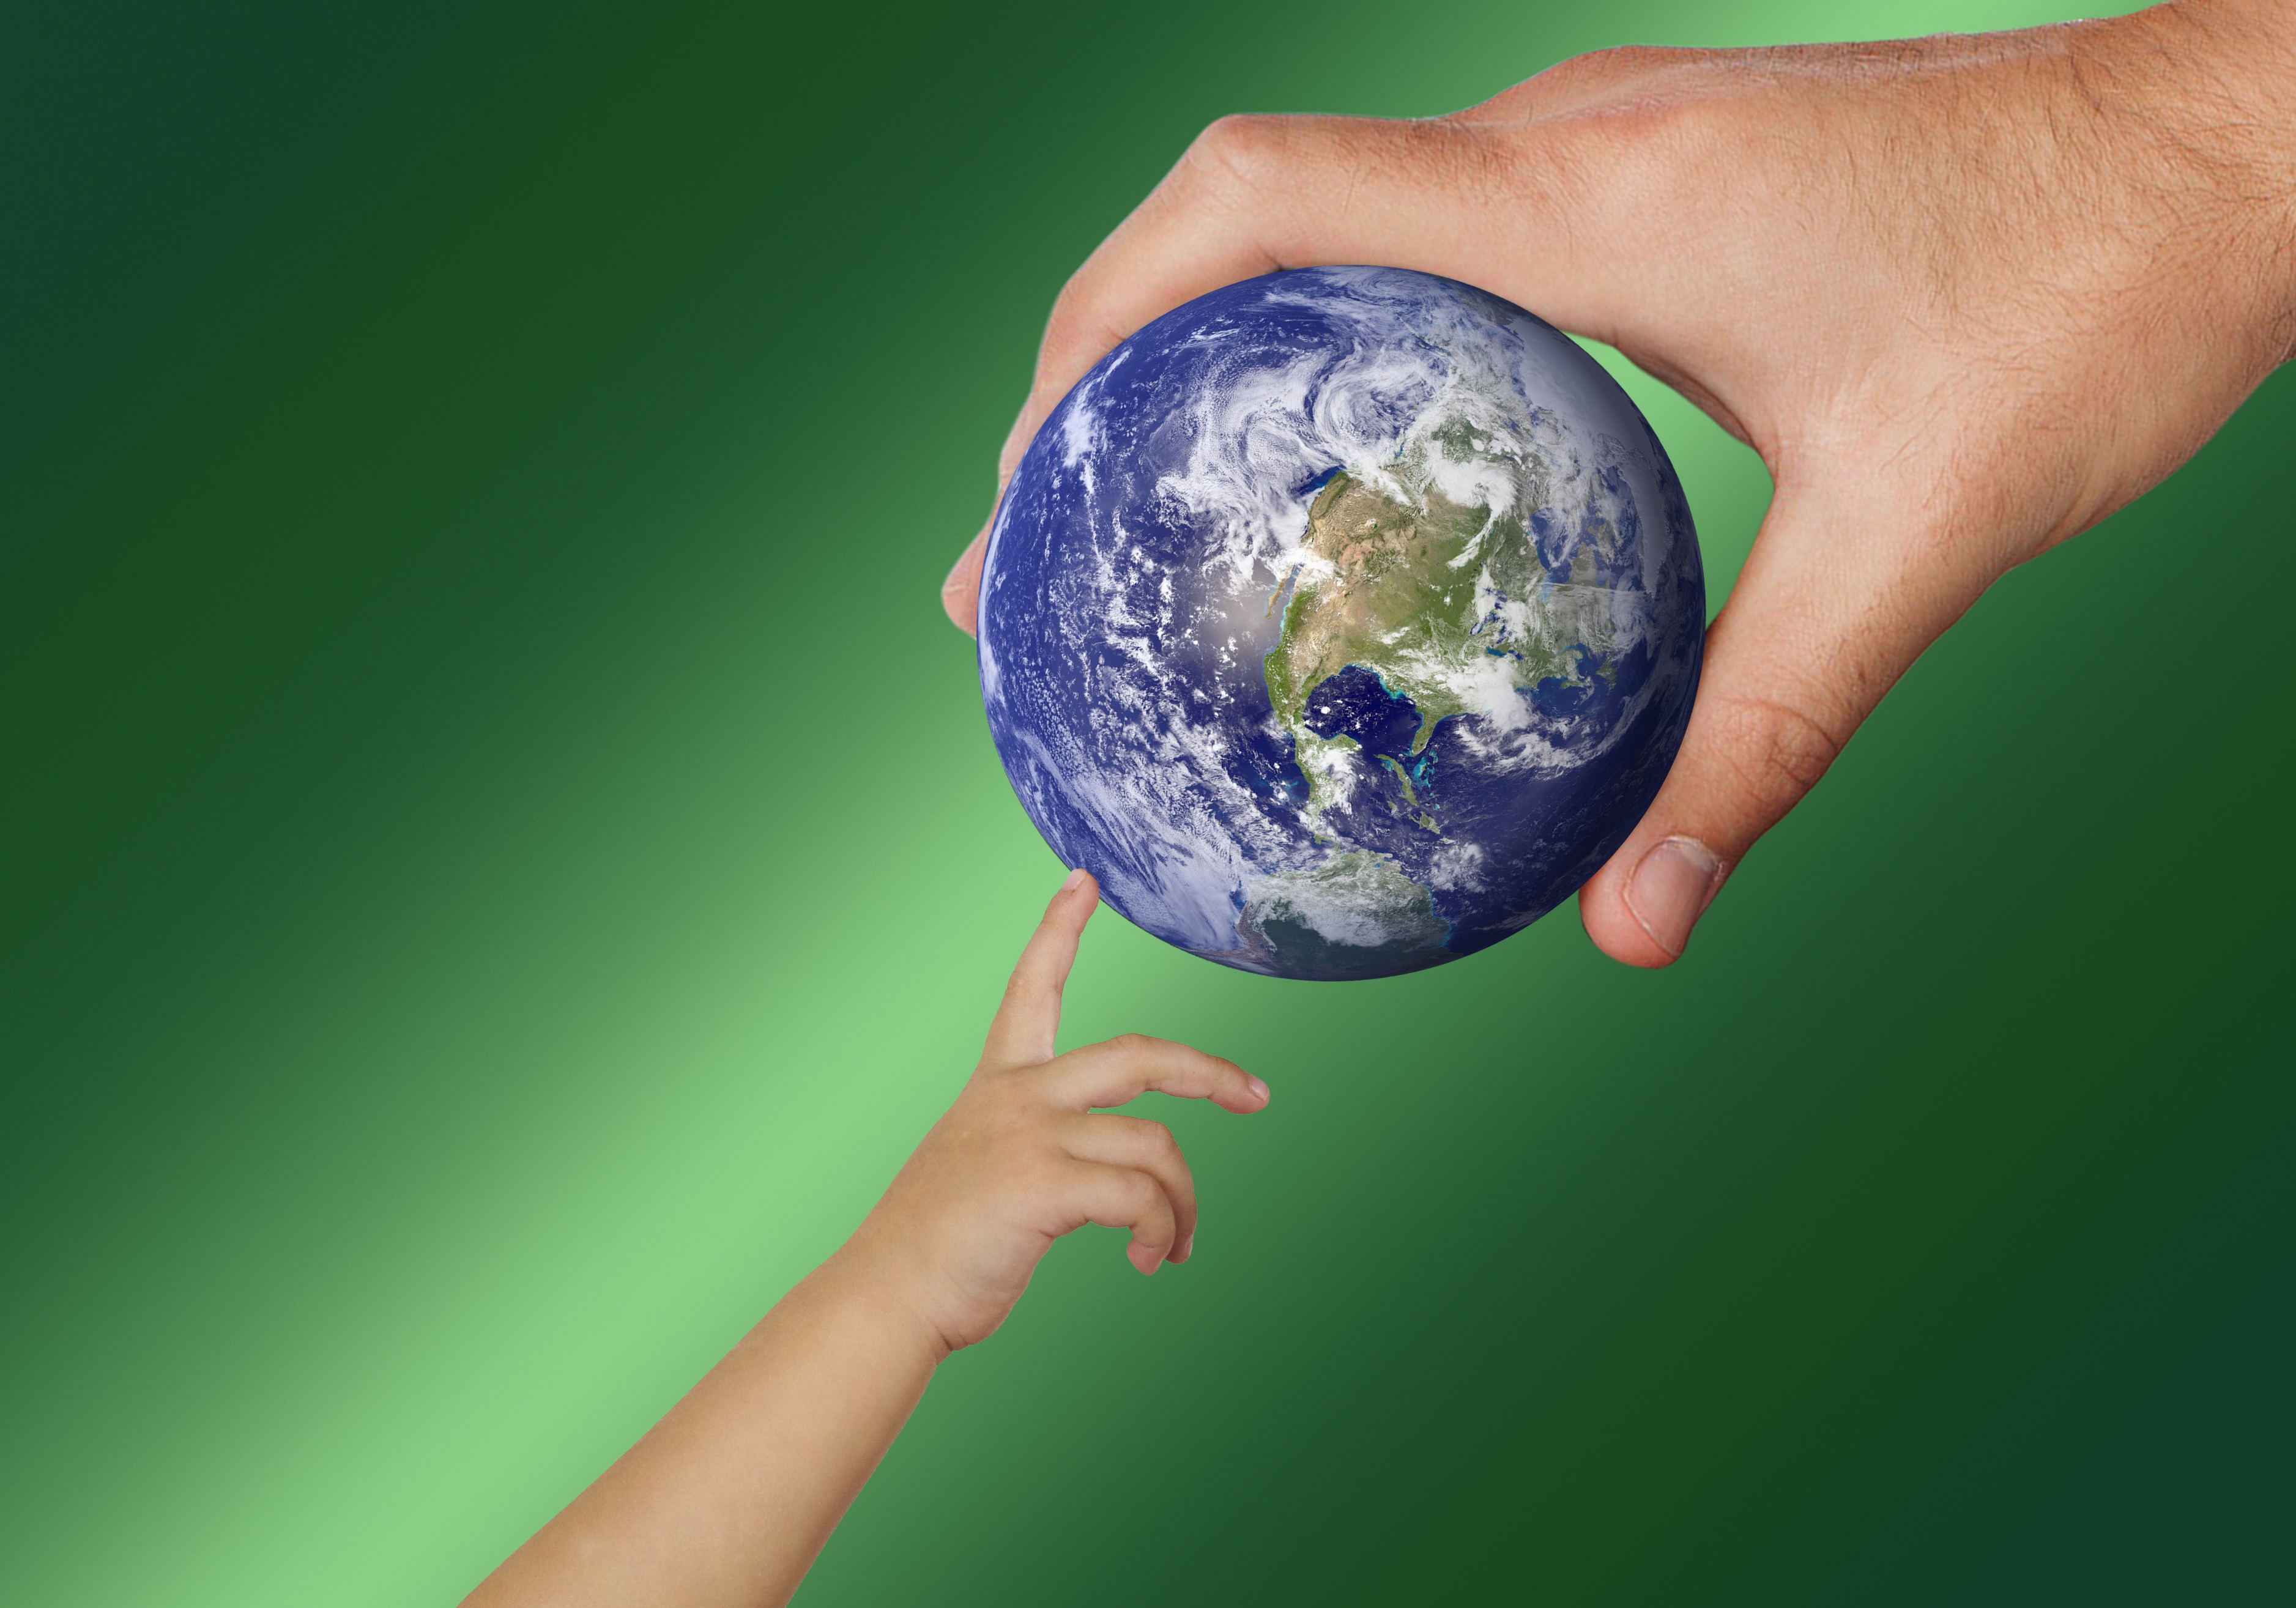 Child touching planet Earth held by an adult